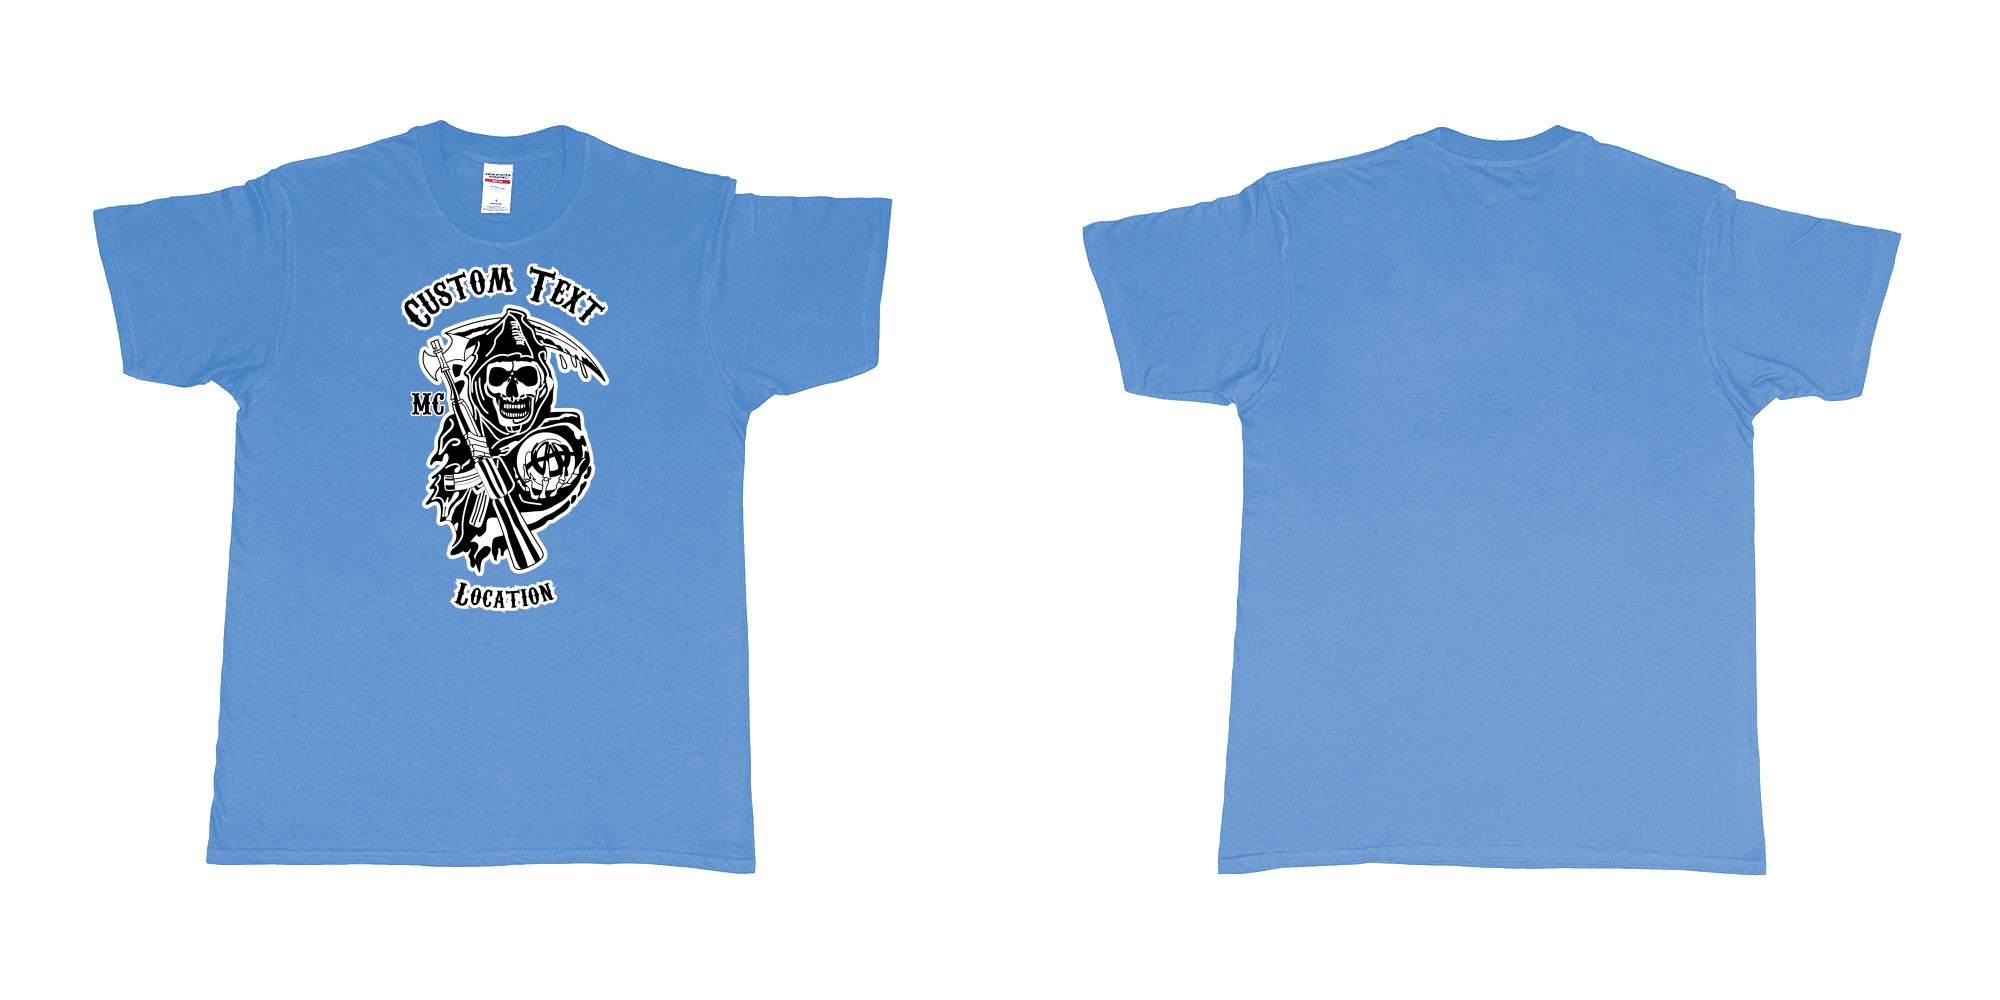 Custom tshirt design son of anarchy logo custom text in fabric color carolina-blue choice your own text made in Bali by The Pirate Way